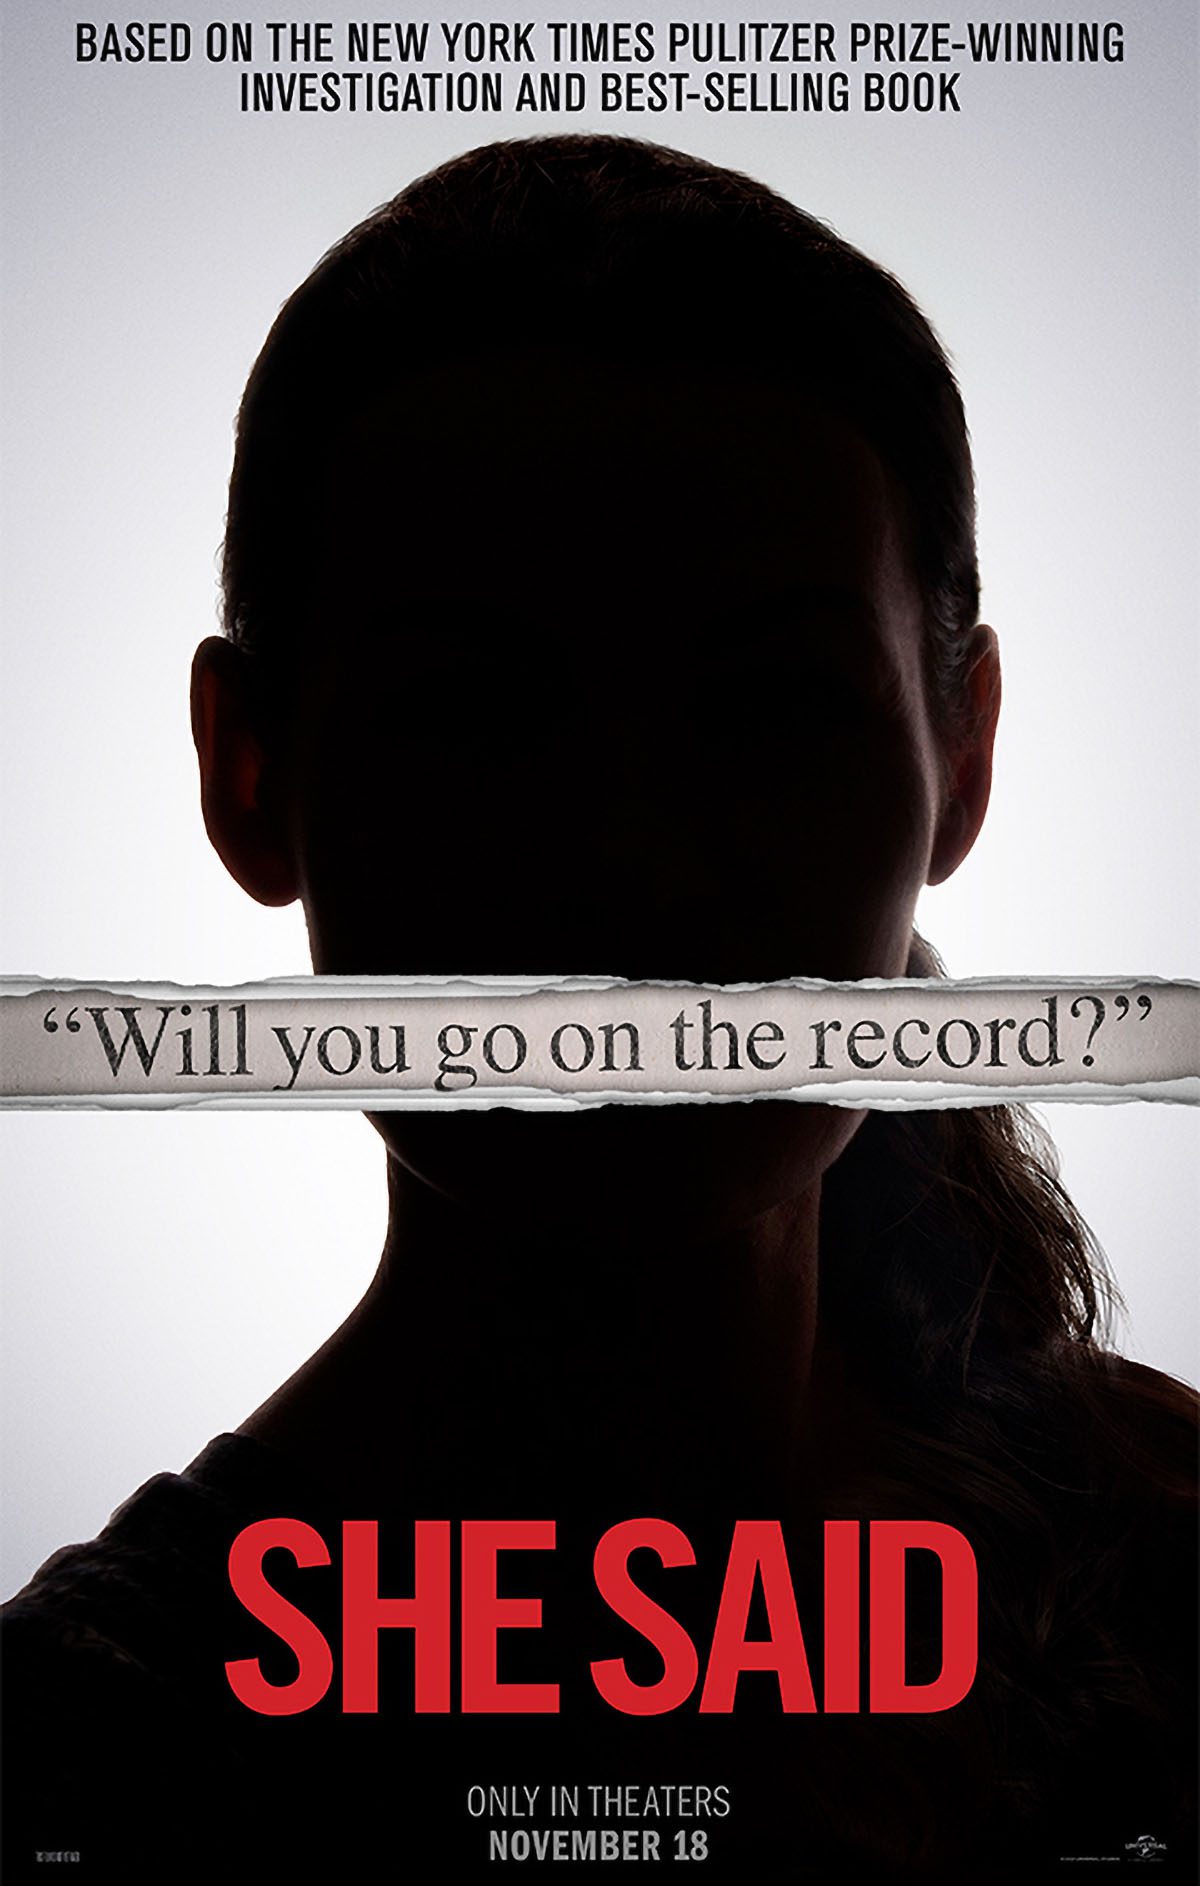 Movie poster for "she said" shows a dark figure and reads "will you go on the record?"